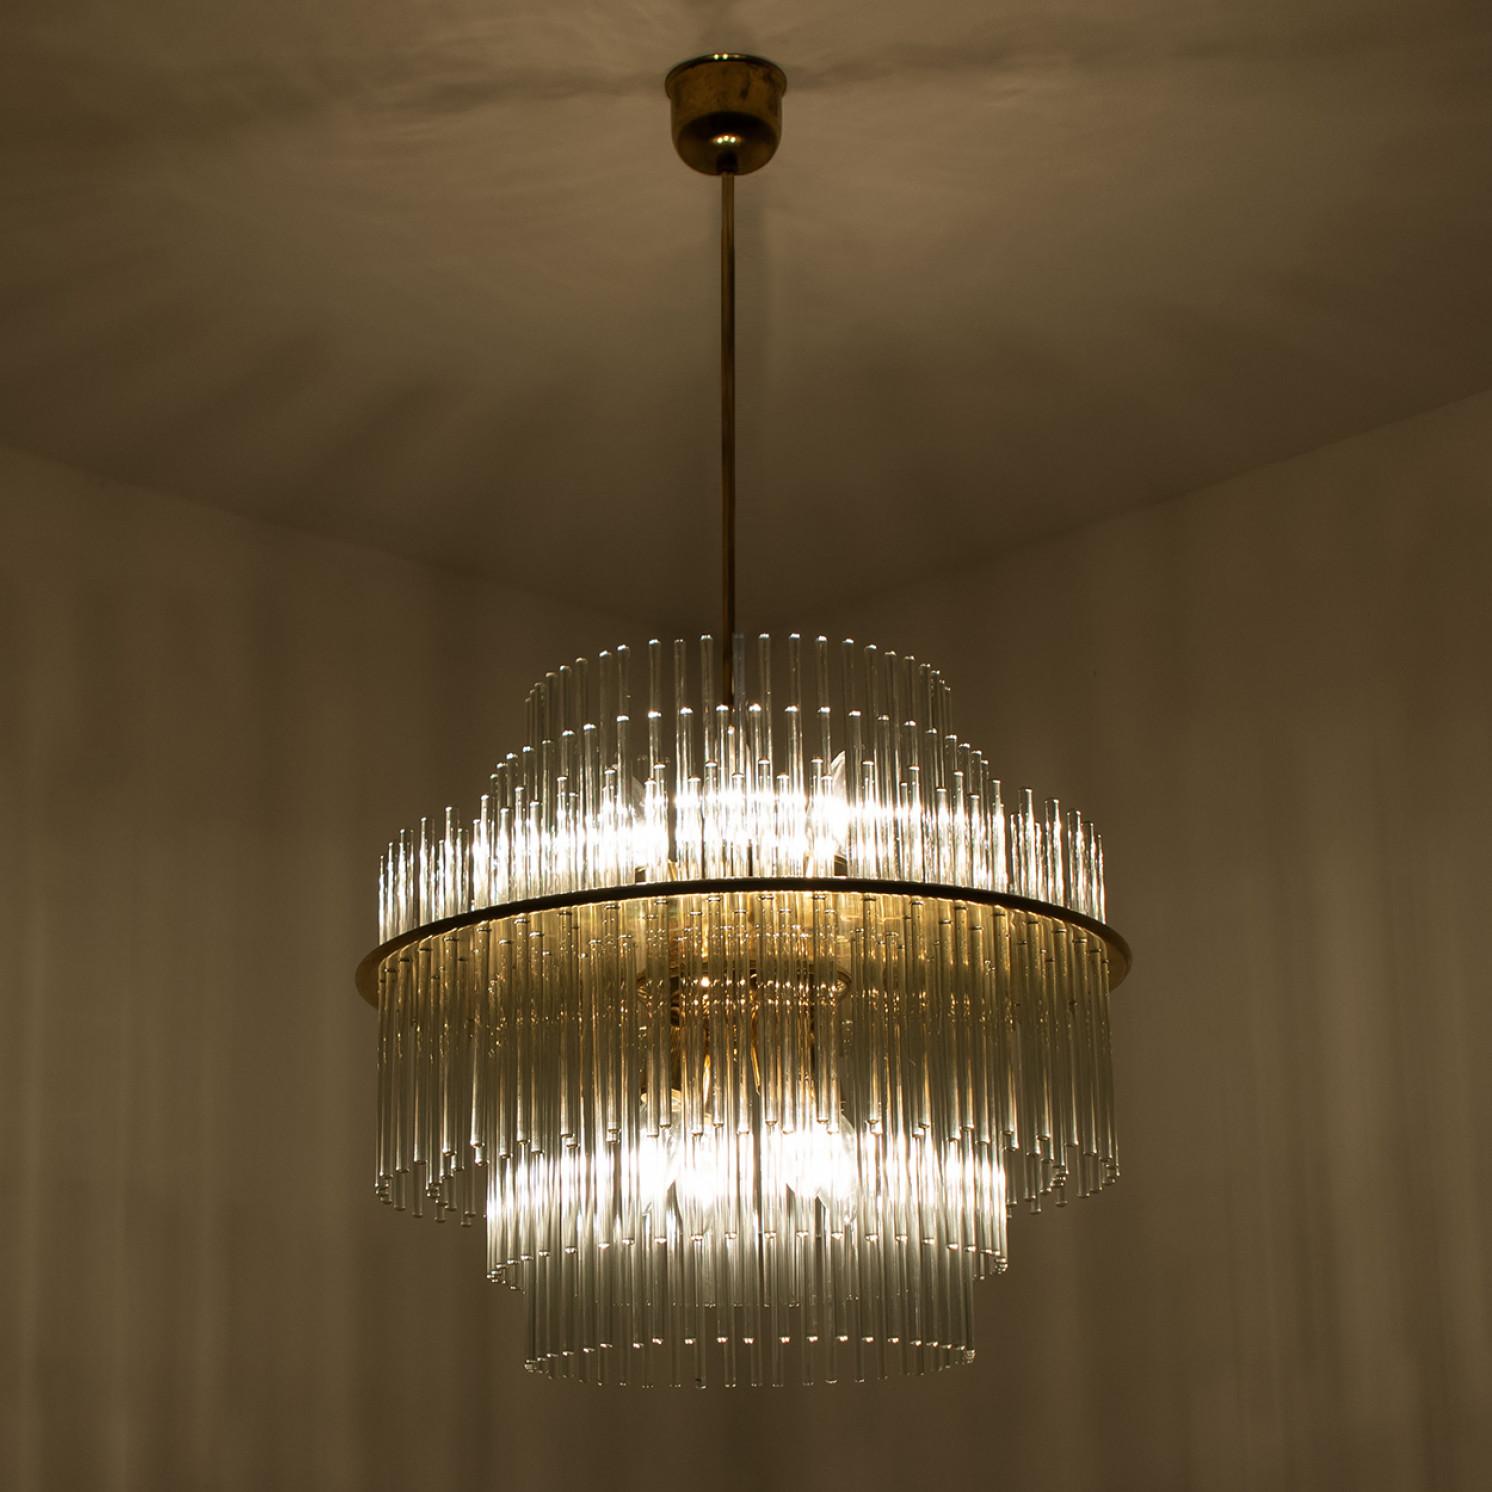 Clean lines to complement all decors. Wonderful high-end light fixture by Sciolari. With brass detail hanging glass giving the piece an elegant appearance which refracts the light, filling a room with a soft, warm glow.

The chandelier has brass